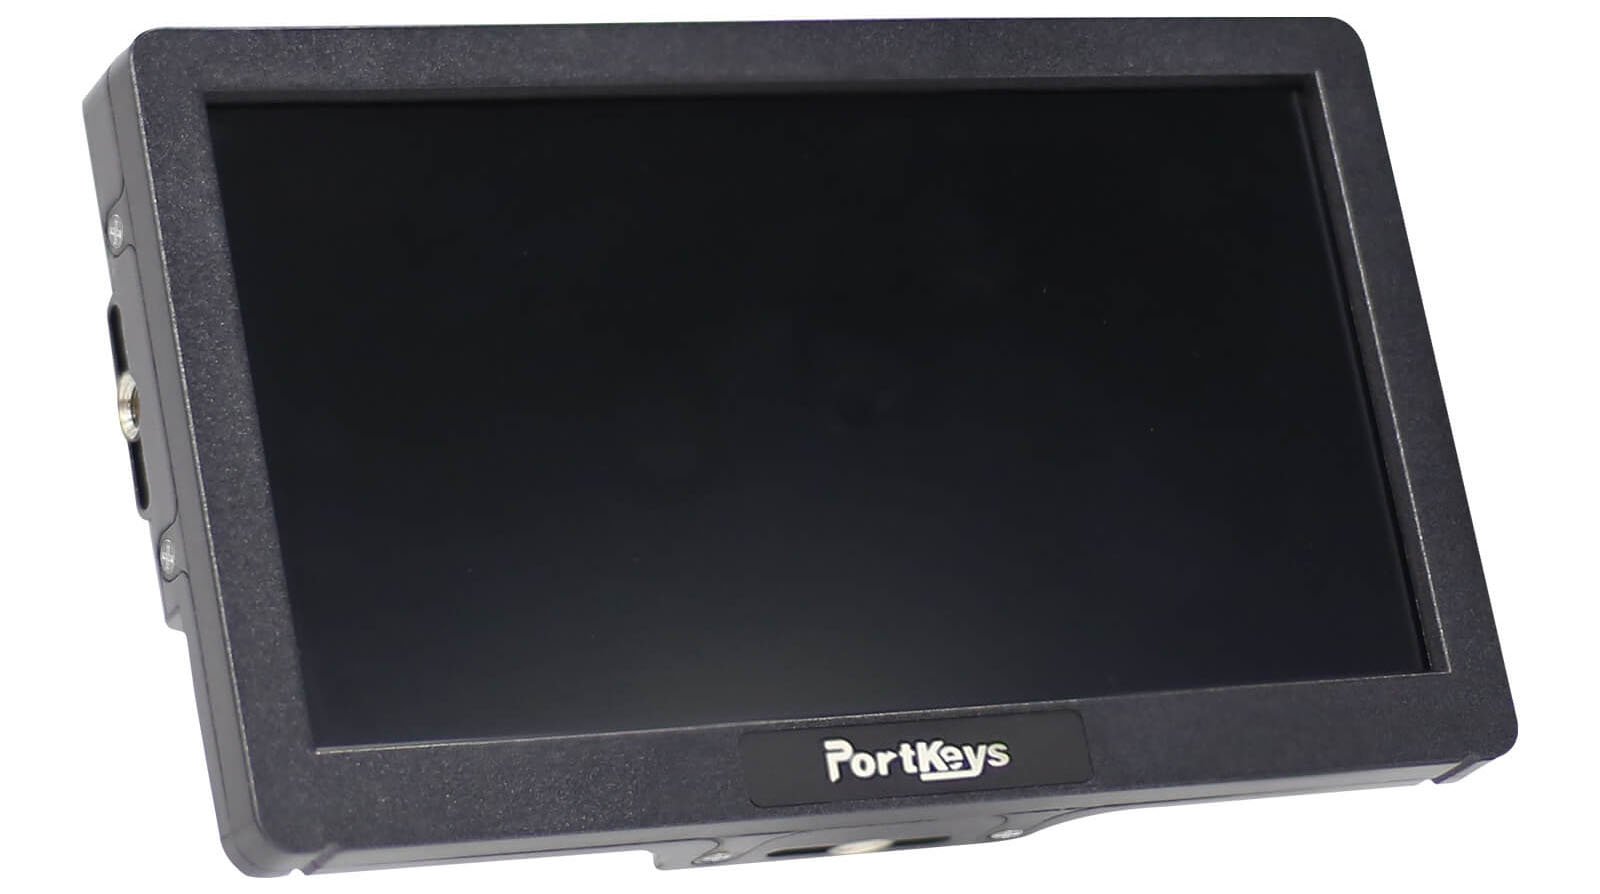 A rectangular PortKeys monitor with a black screen and dark-colored bezel. The monitor has a branded label reading "PortKeys" at the bottom center of the frame. The edges of the monitor's casing feature various input and output ports.